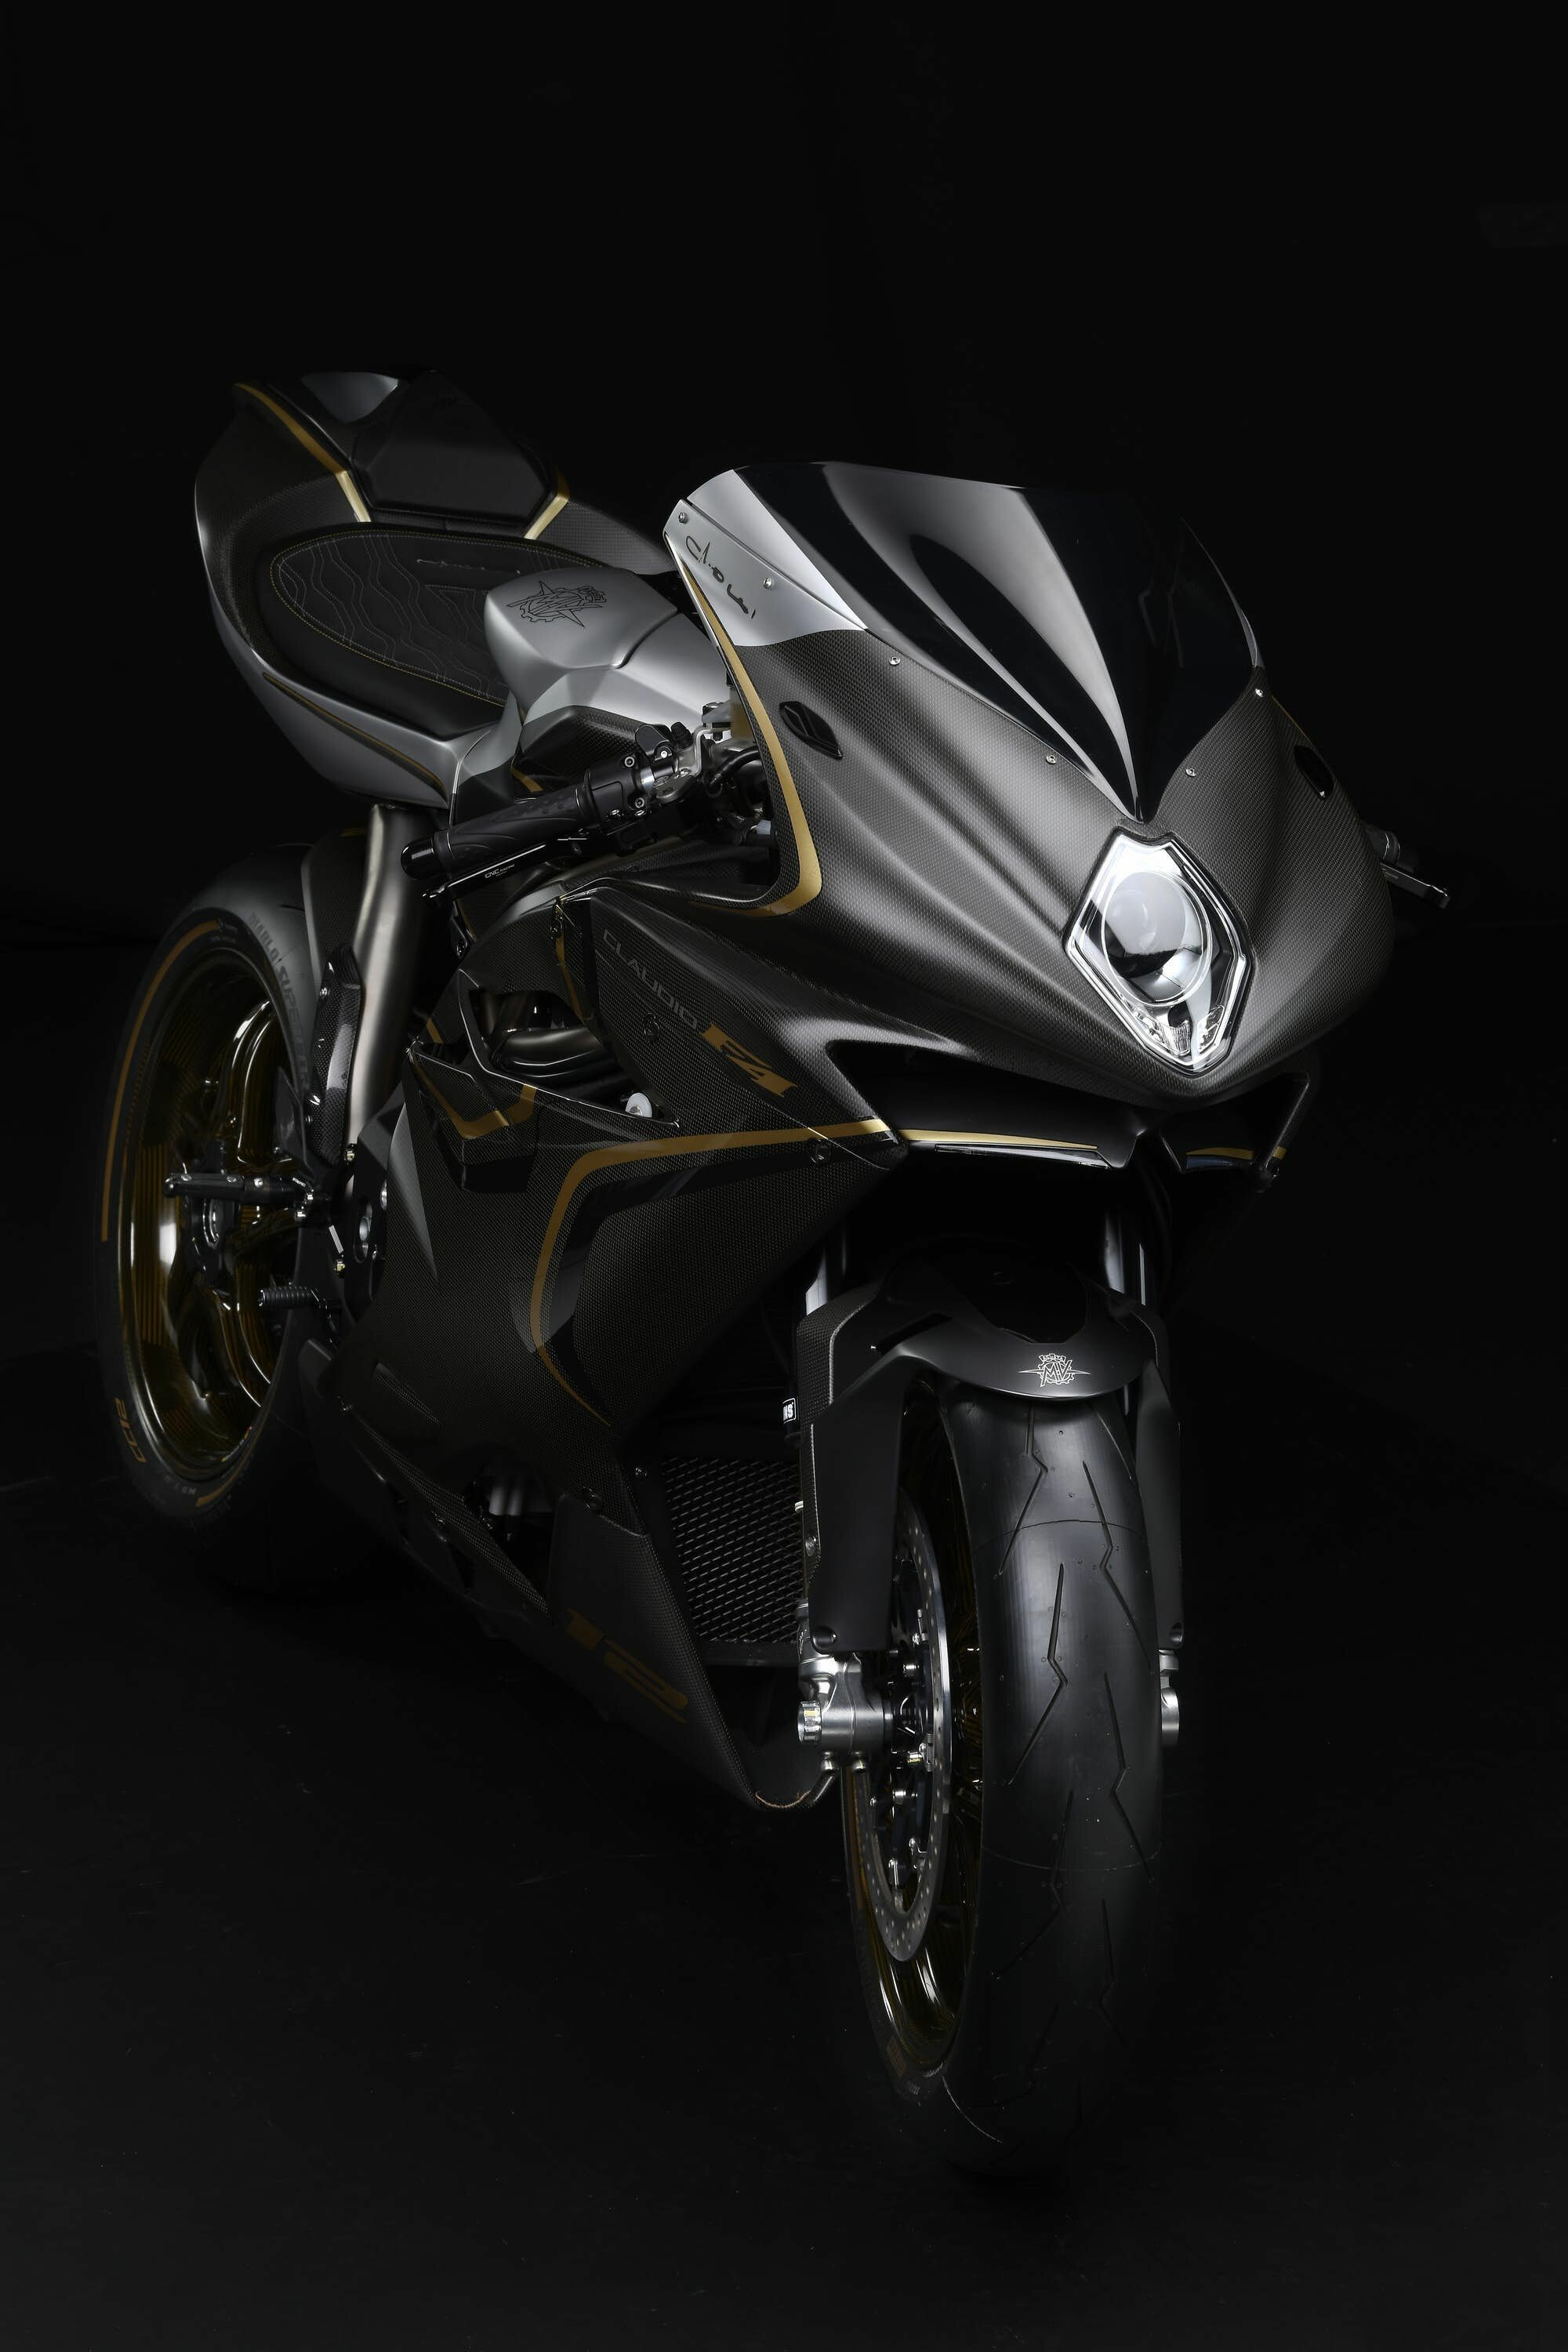 MV Agusta: An Italian motorcycle manufacturer founded in 1945, F4, Superbike. 2000x3000 HD Wallpaper.